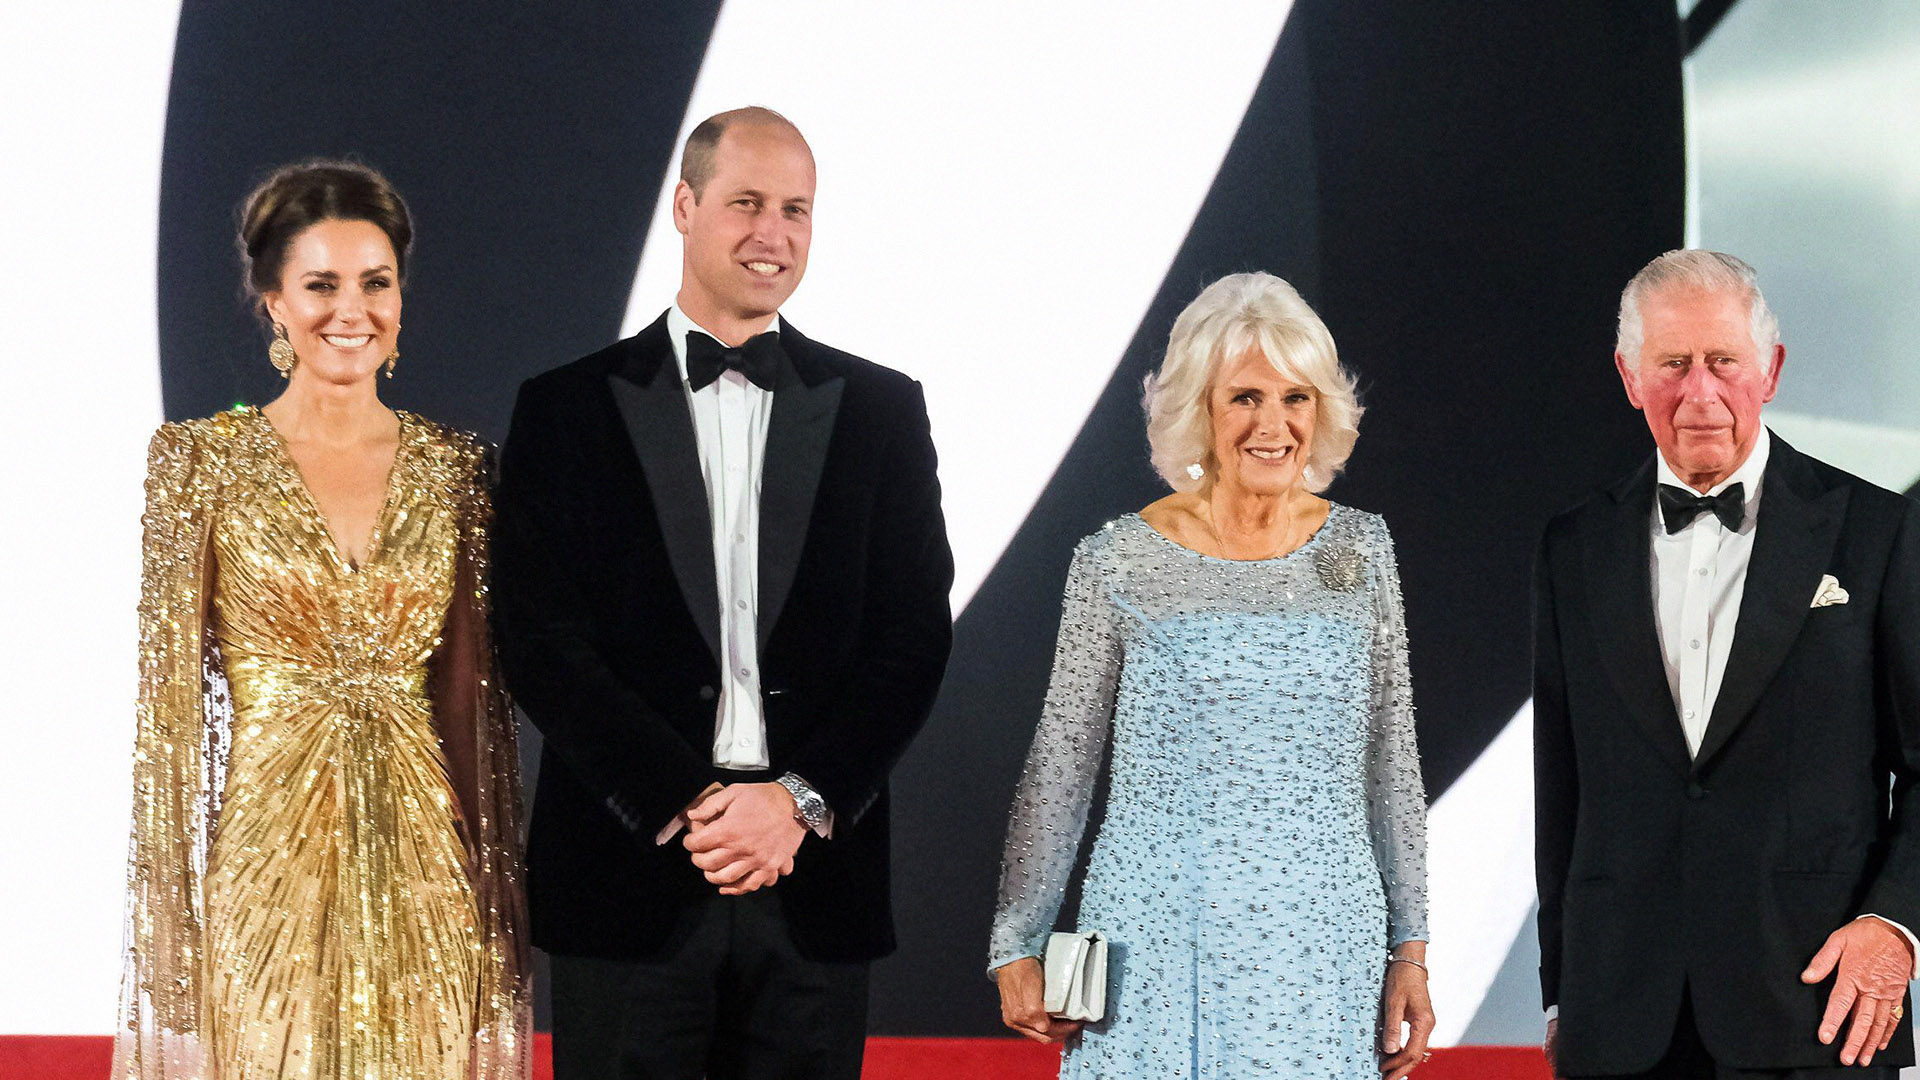 Prince William and Princess Kate's Relationship with Queen Camilla: Friendship or Hidden Hostility?